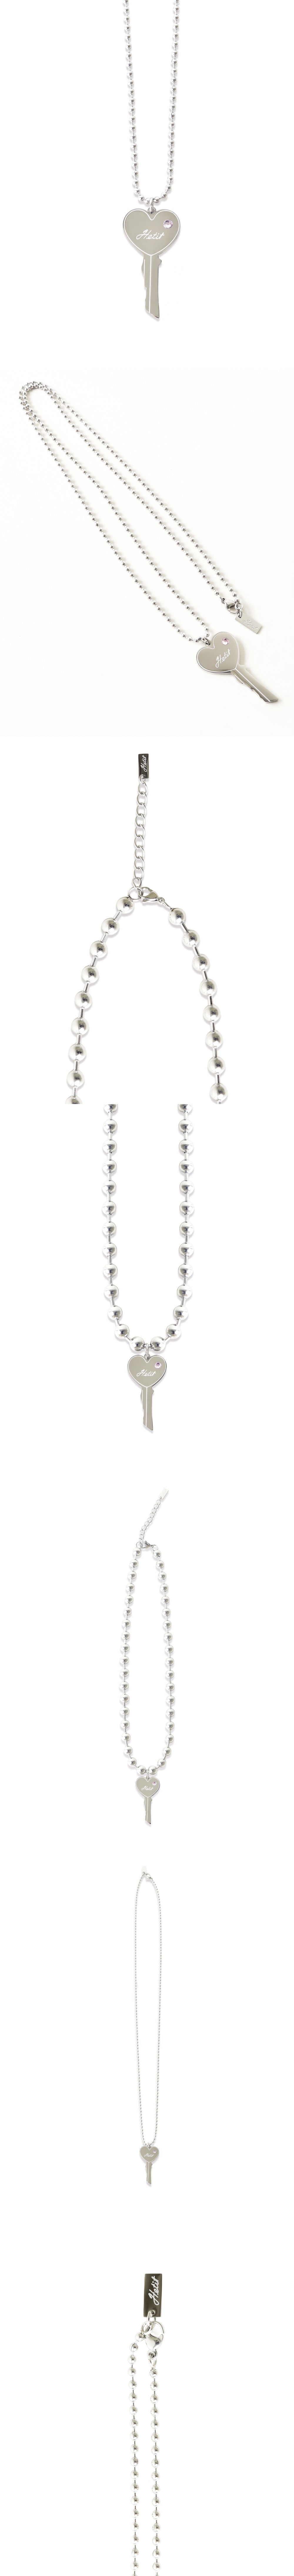 Bling Heart Key Necklace (Bold Chain)